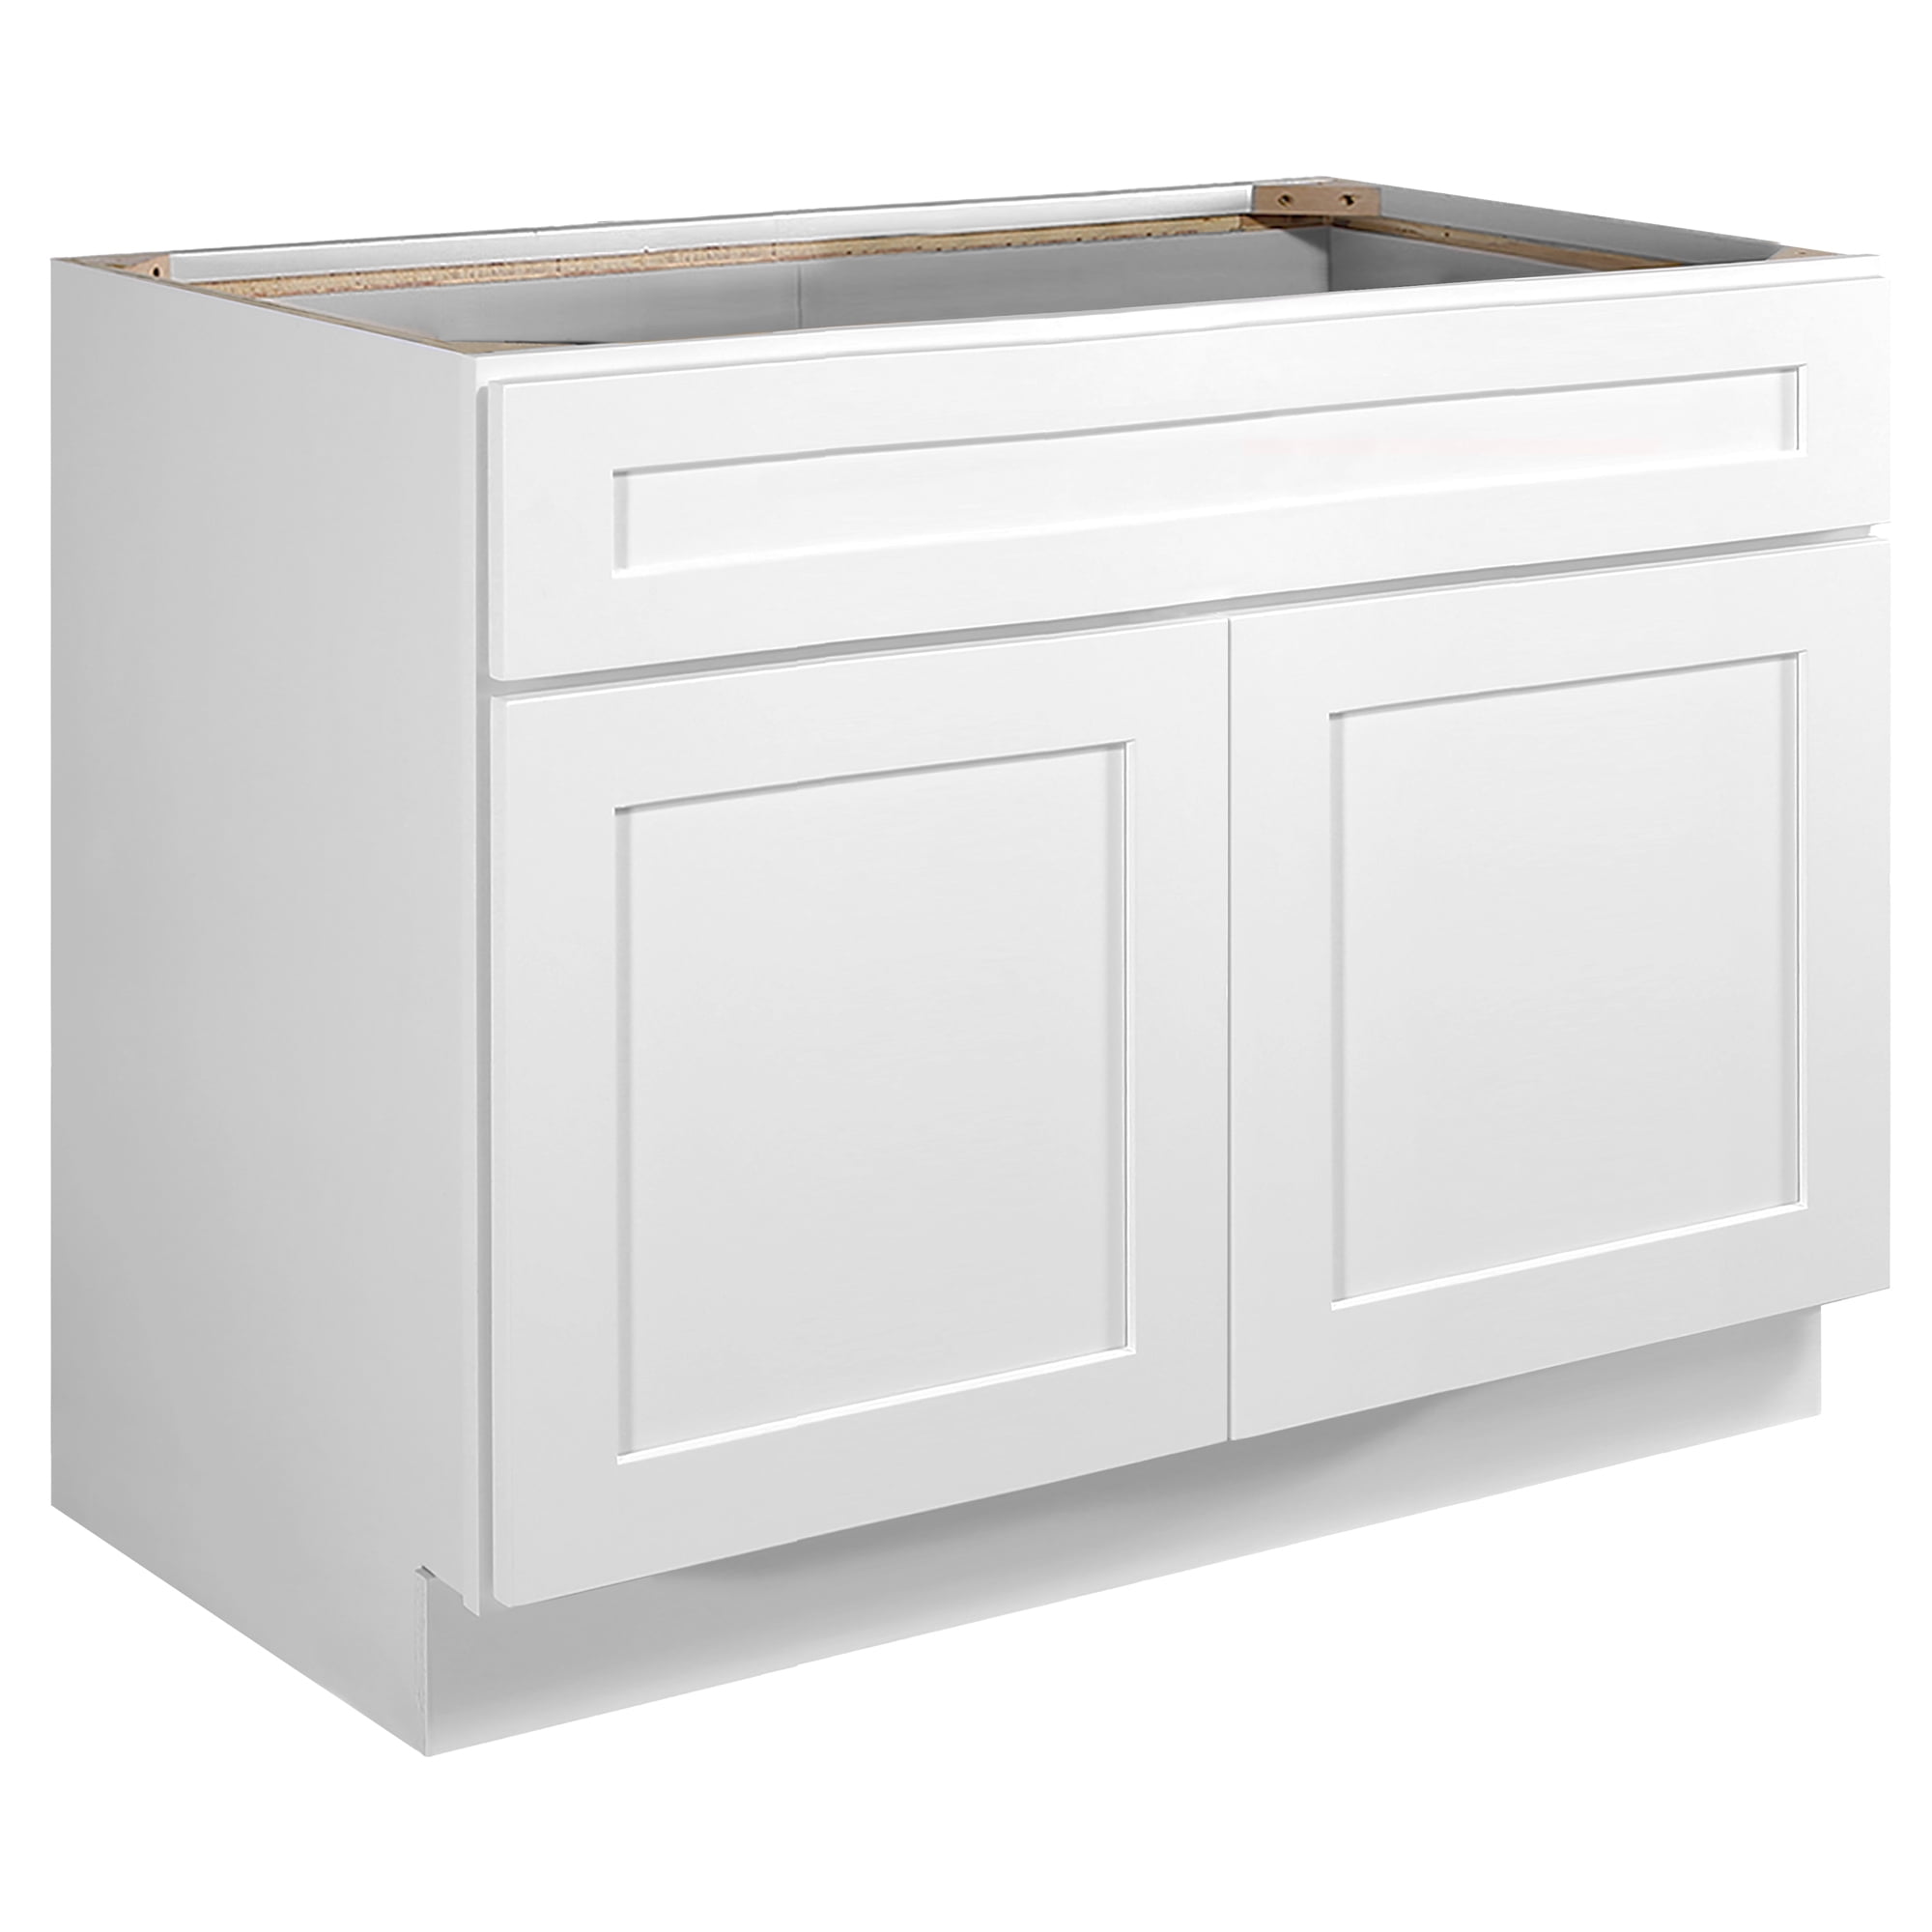 Design House 620286 Brookings Fully Assembled Shaker Style Sink Base Kitchen Cabinet 36x34 5x24 Espresso Com